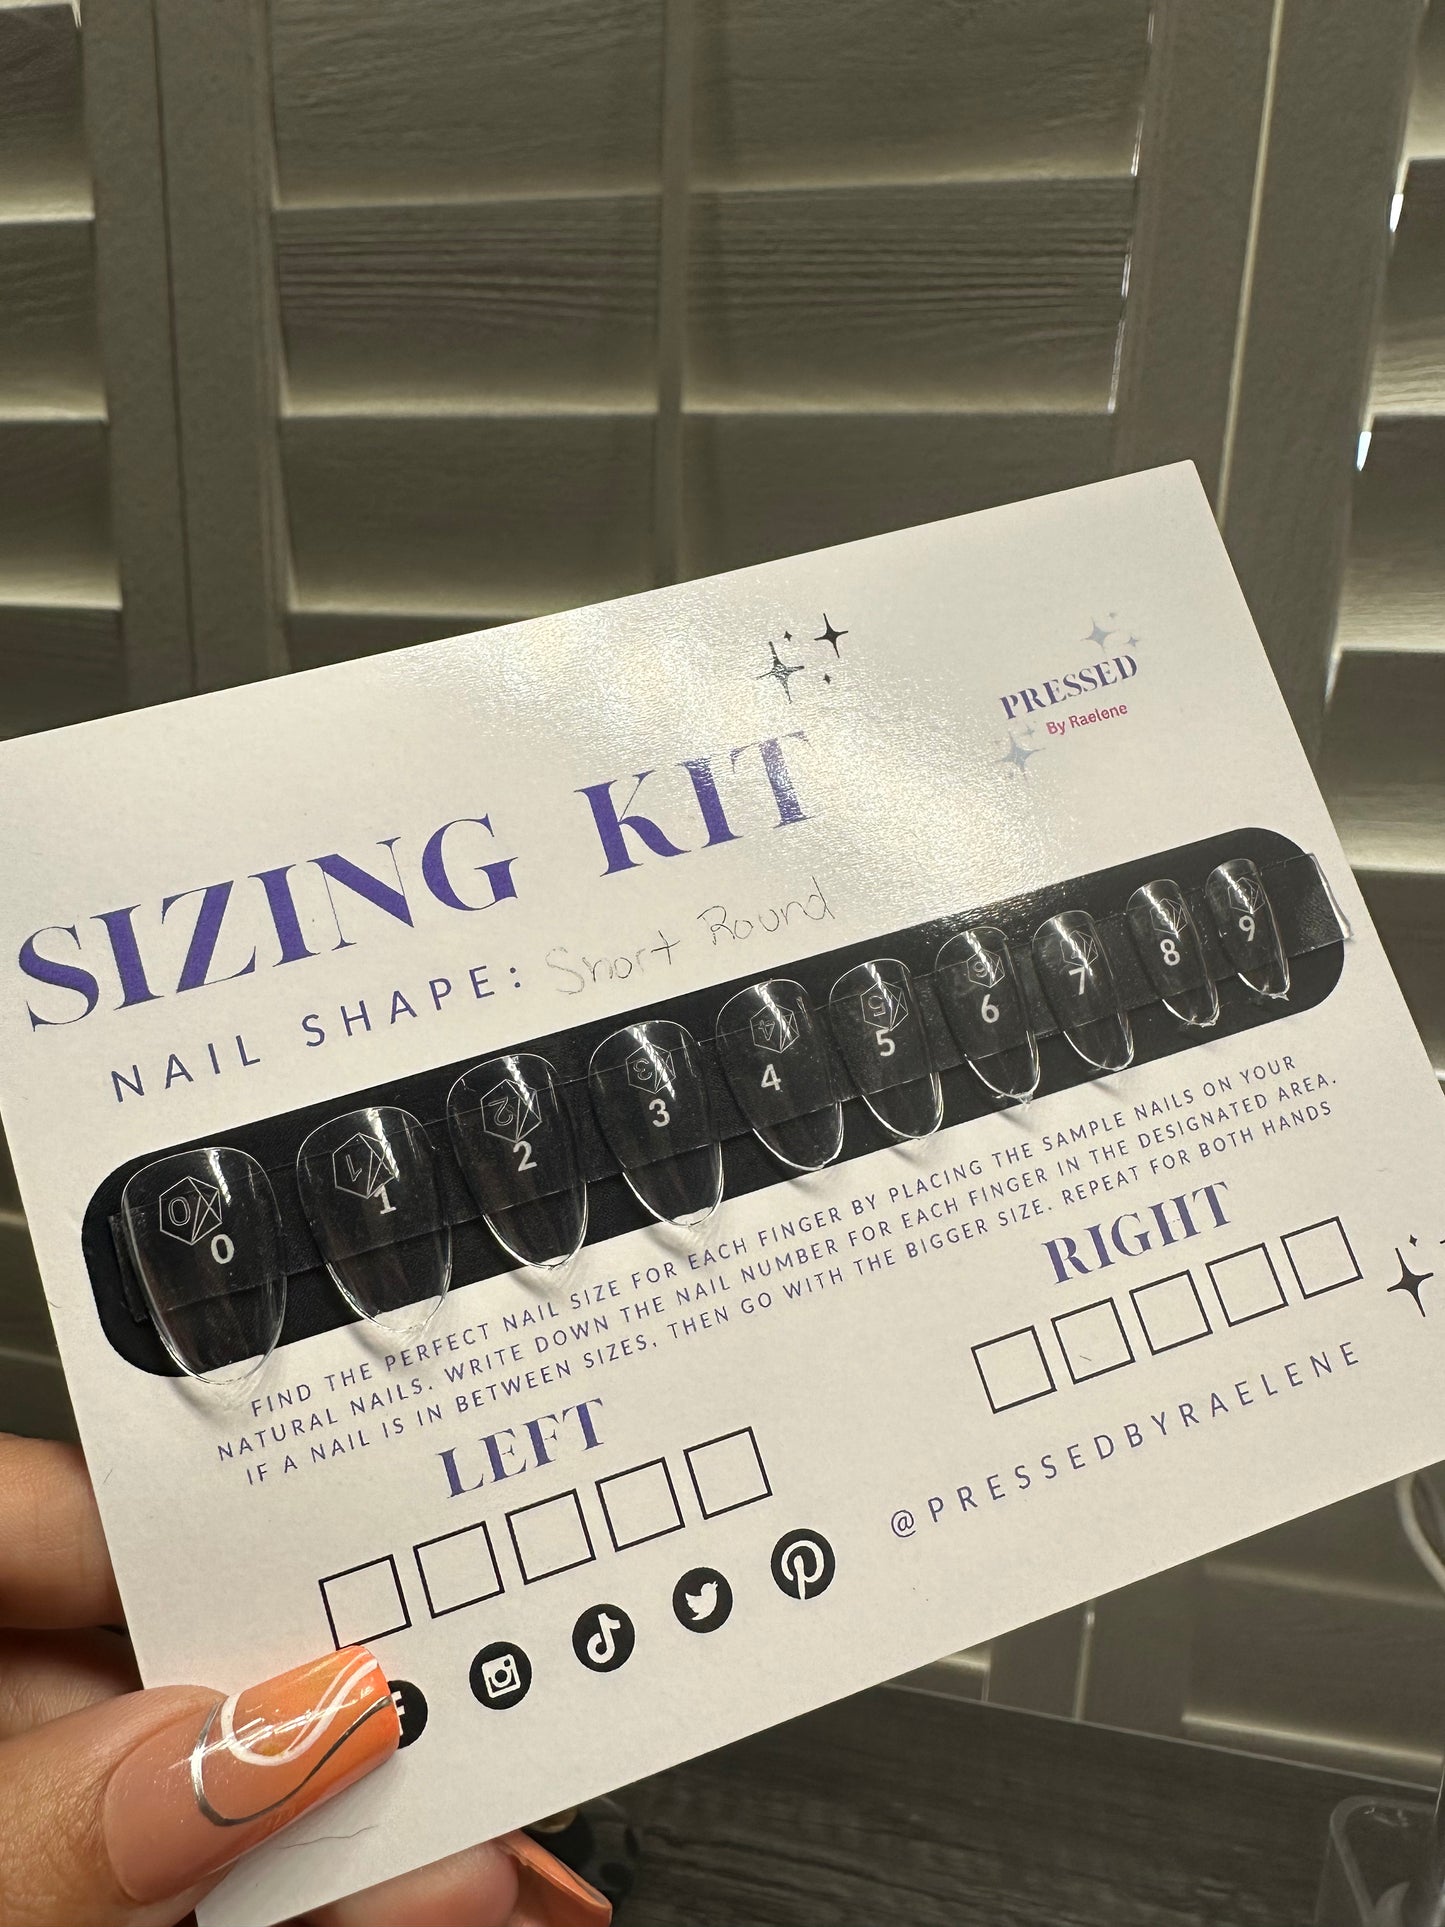 Sizing Kits (Required for XXShort/XXLong Tips)